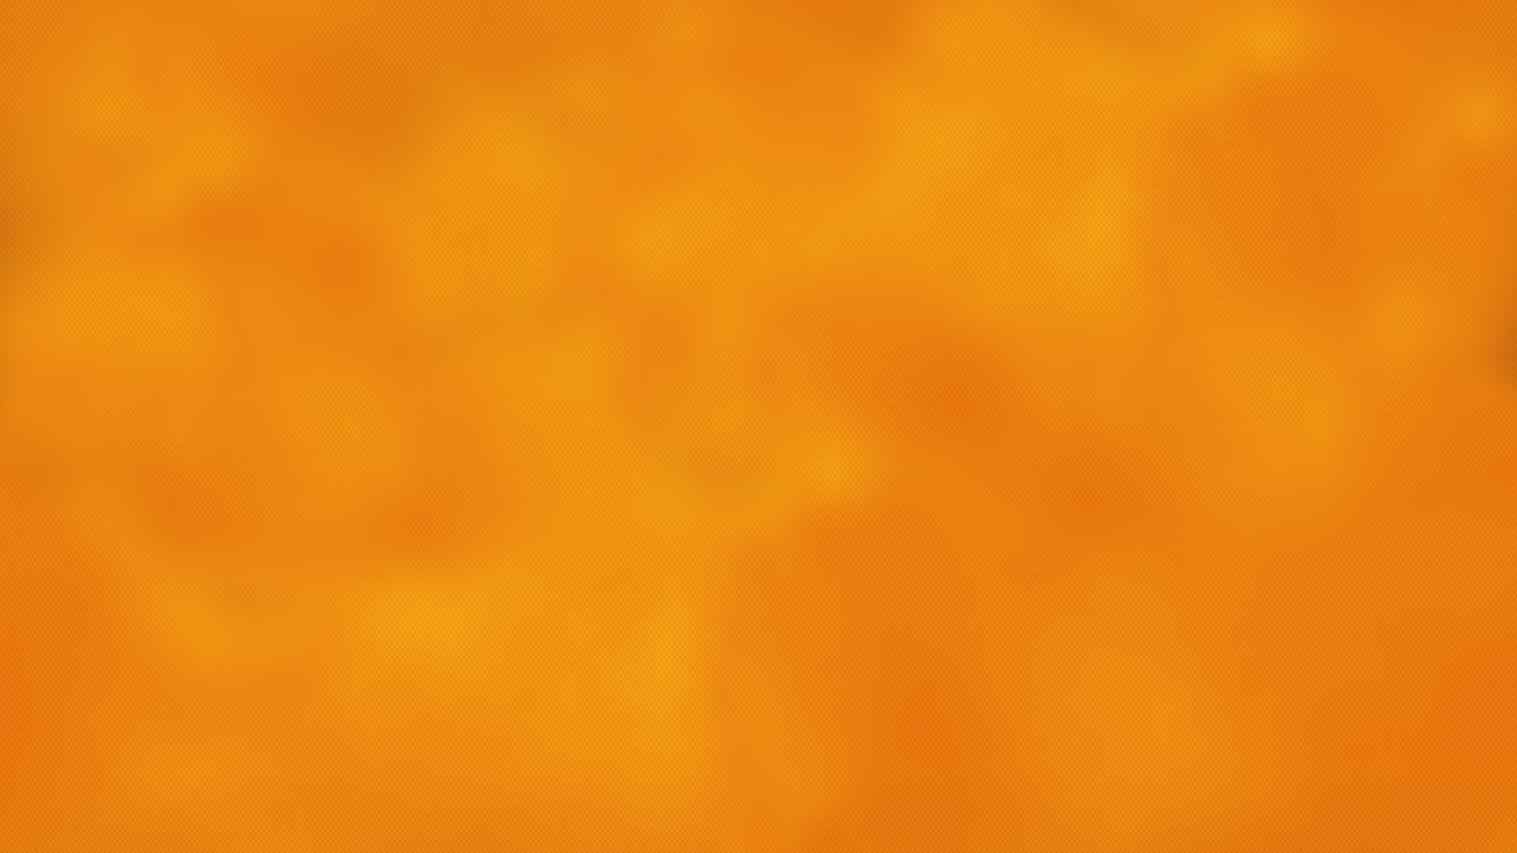 Backgrounds For BJP Wallpapers - Wallpaper Cave